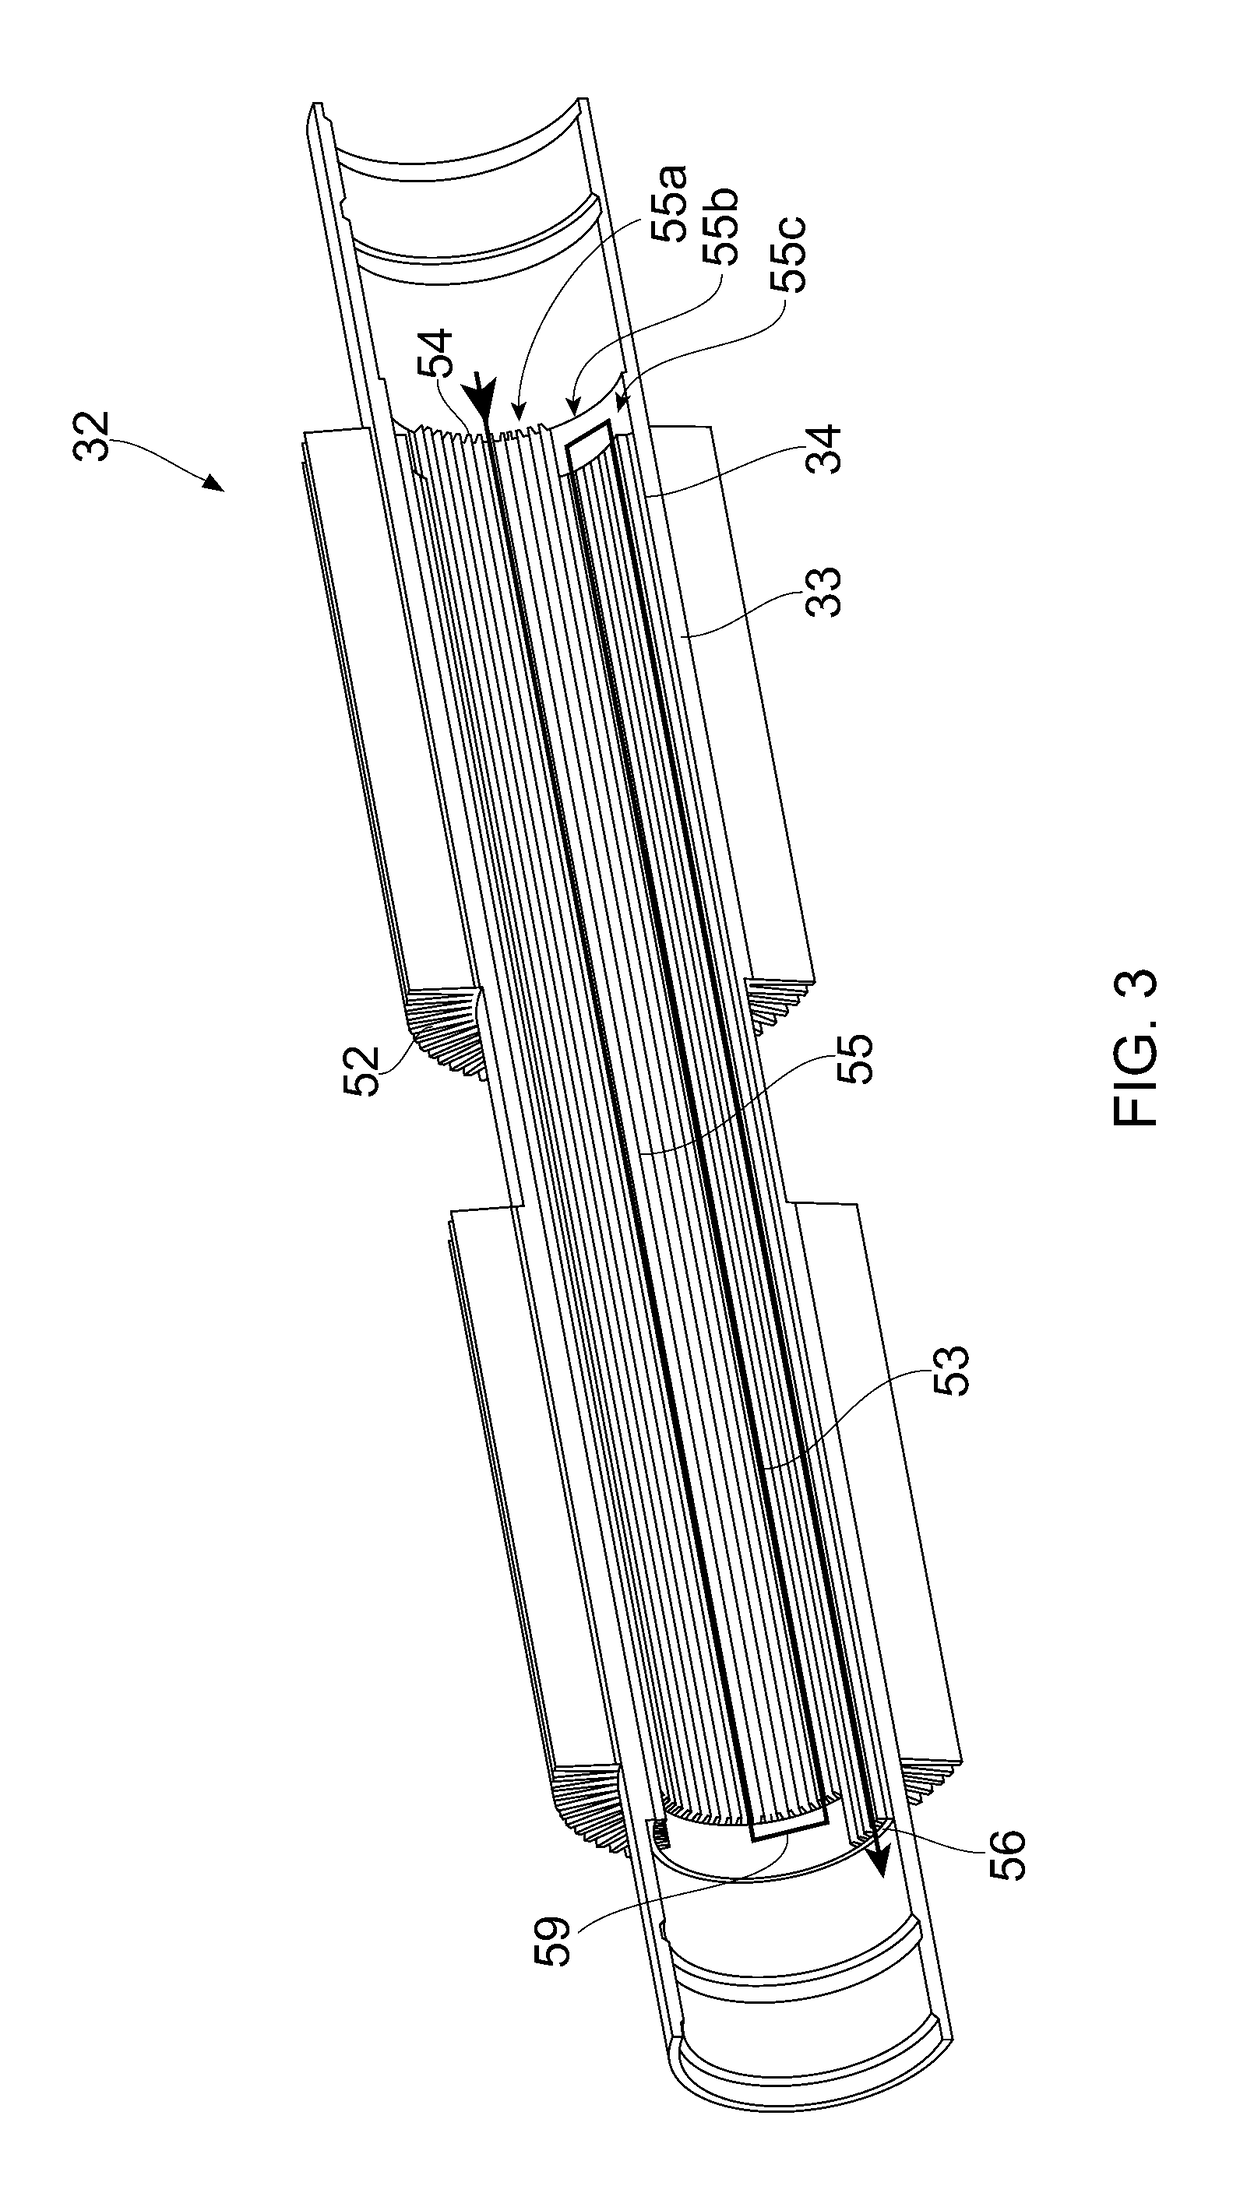 Heat exchanger having a coaxial or concentric tube construction